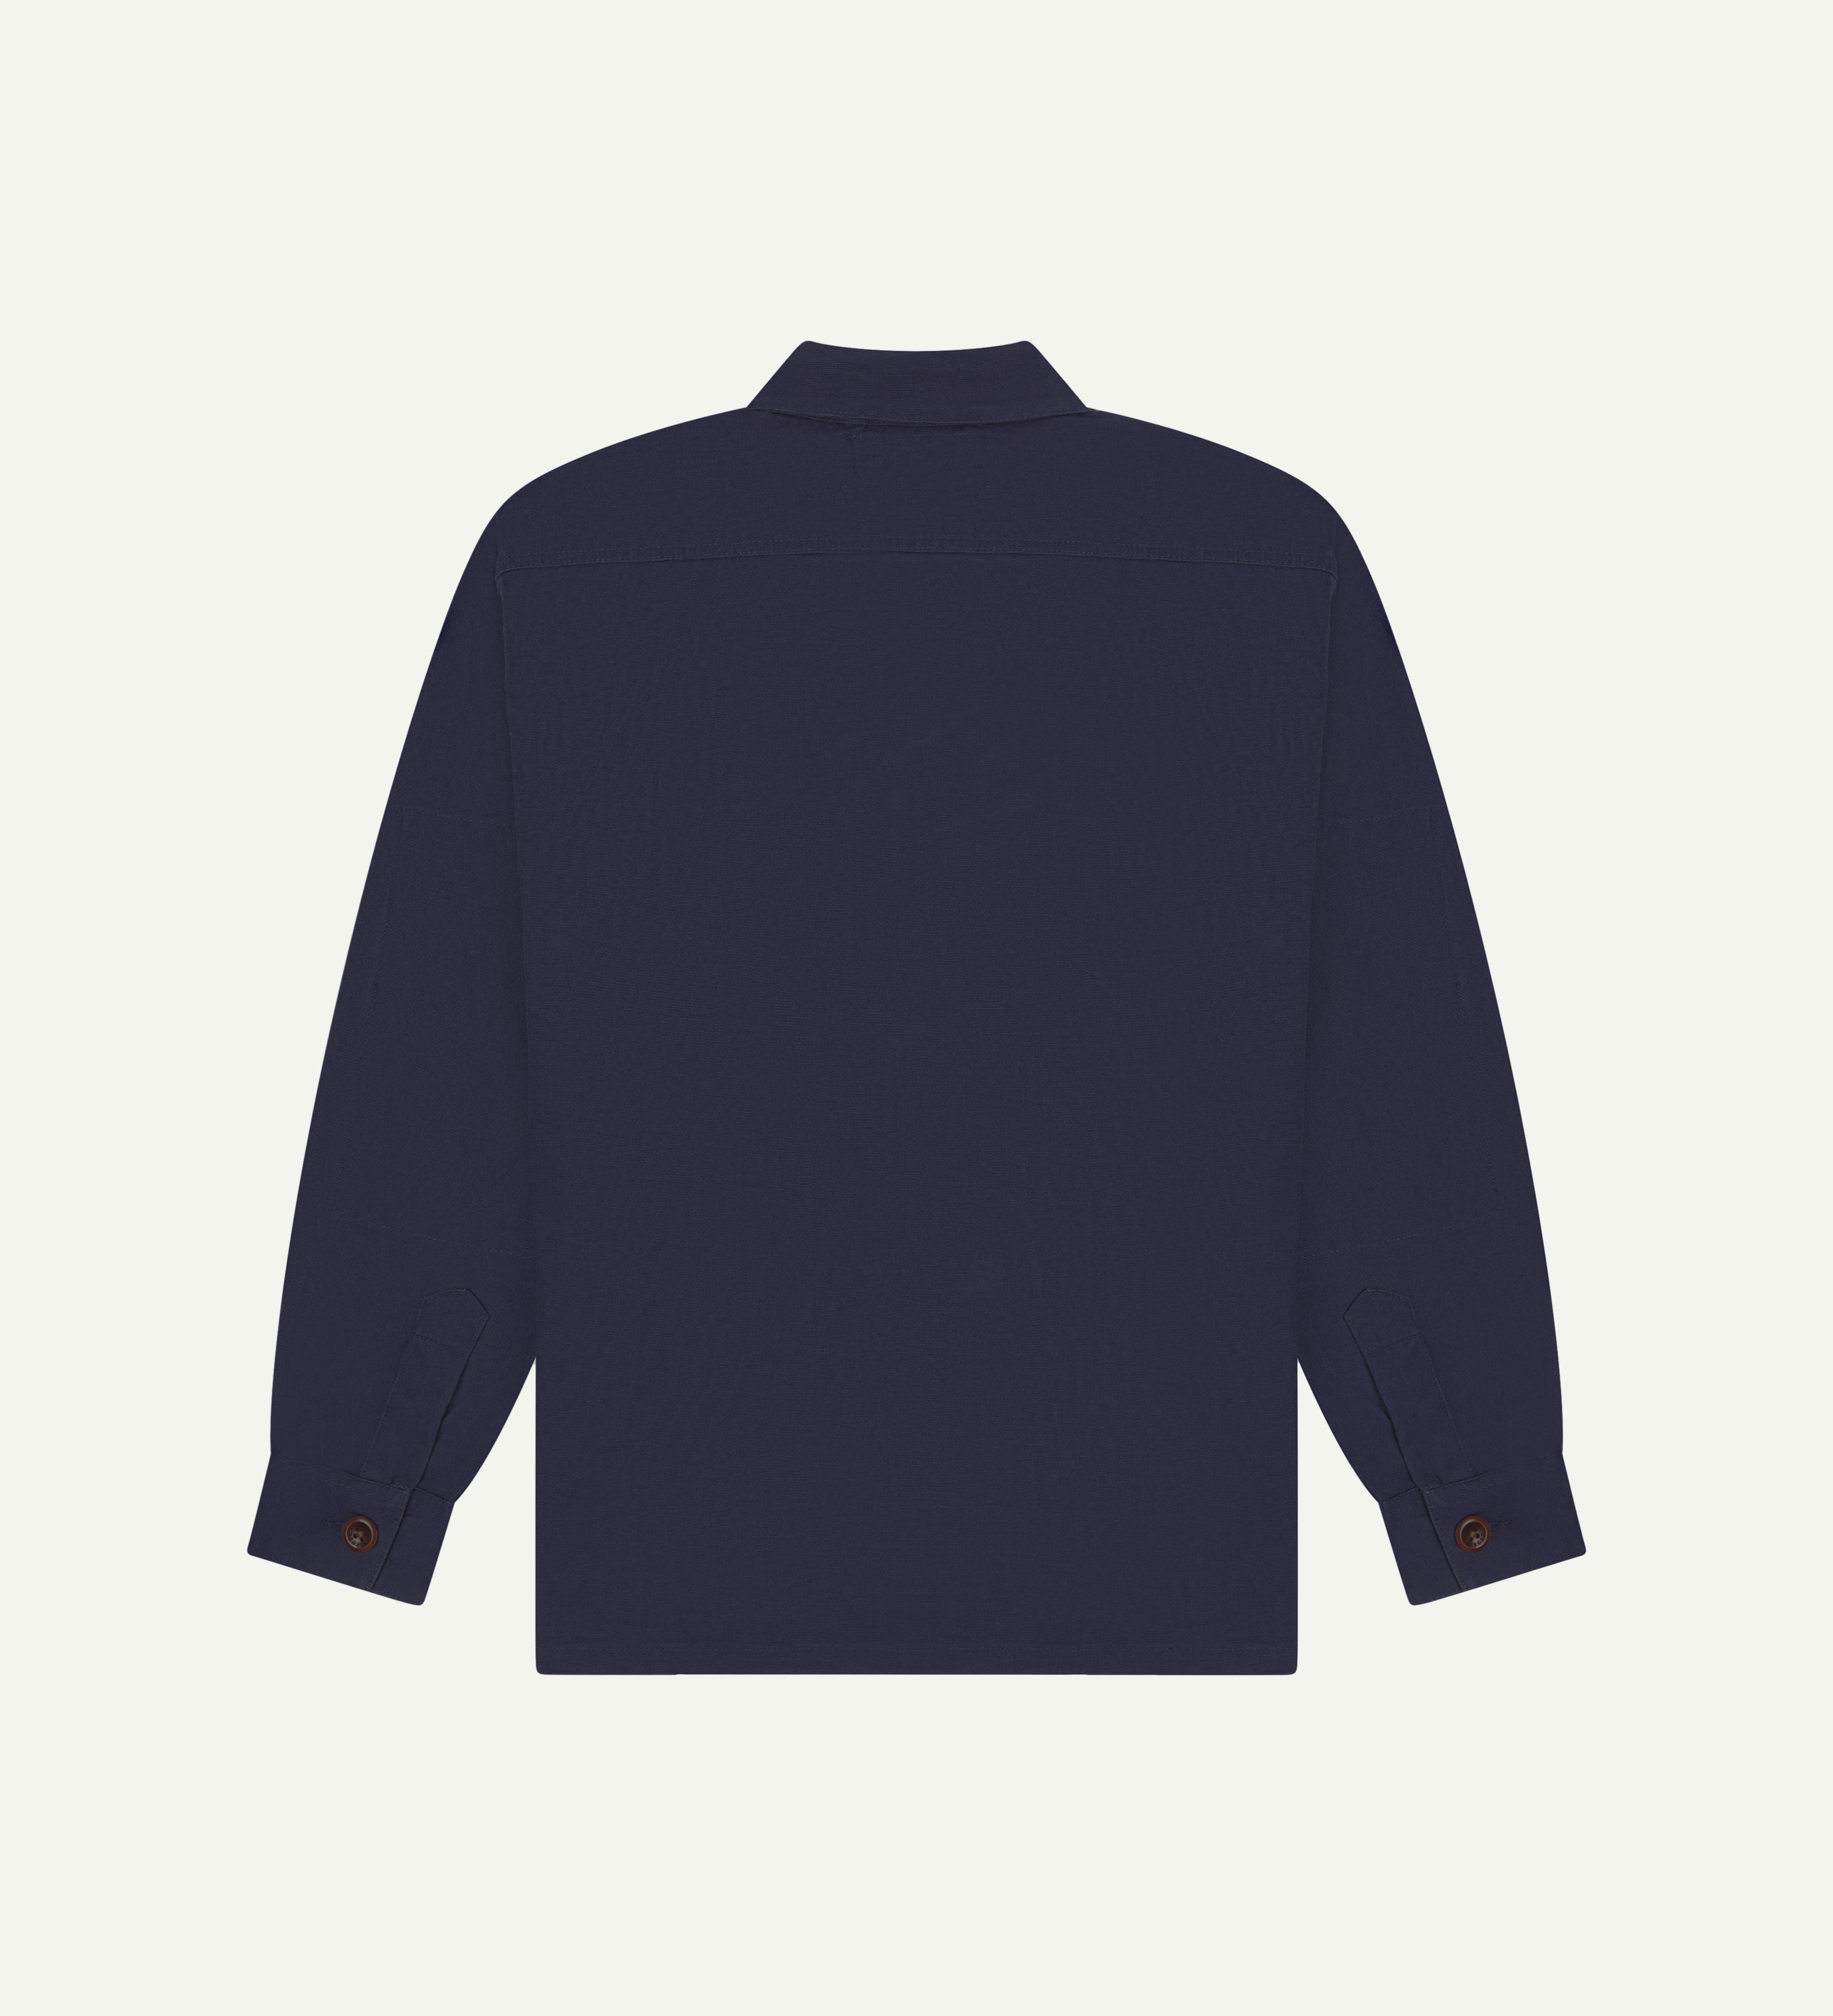 Back view flat shot of dark blue #3003 men's organic cotton workshirt from Uskees. 